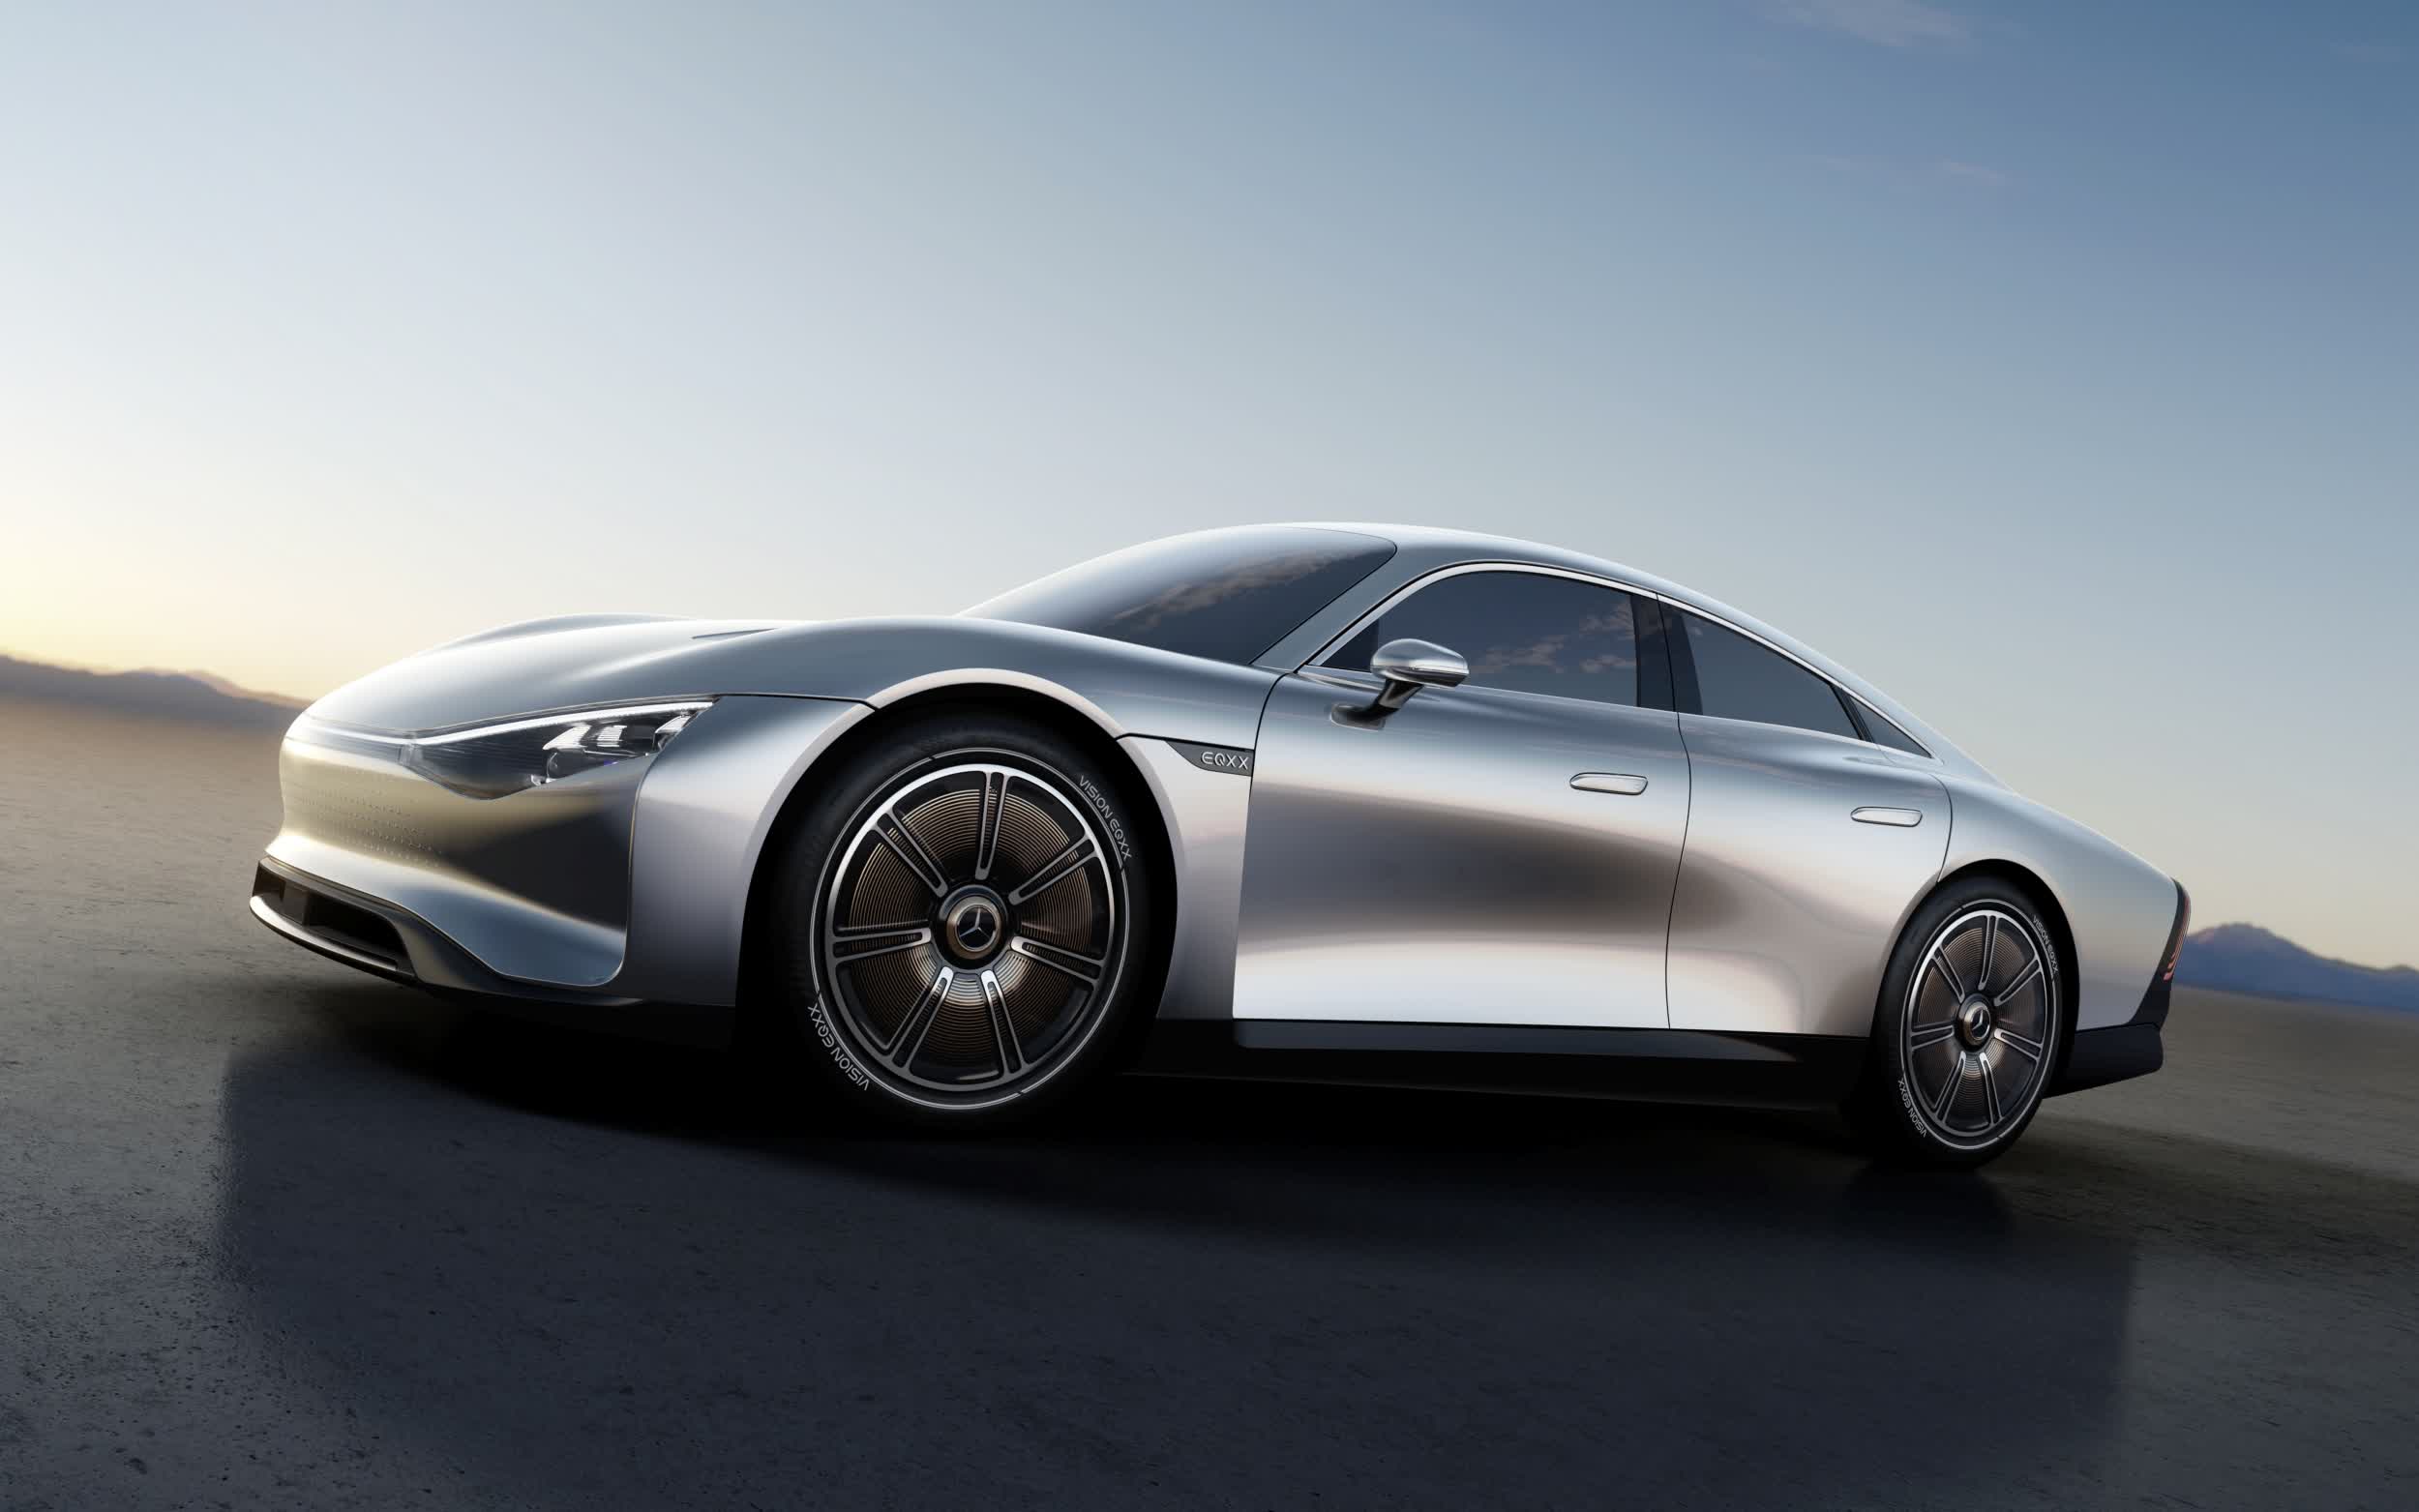 Mercedes-Benz squeezes 620 miles of range from its latest concept EV